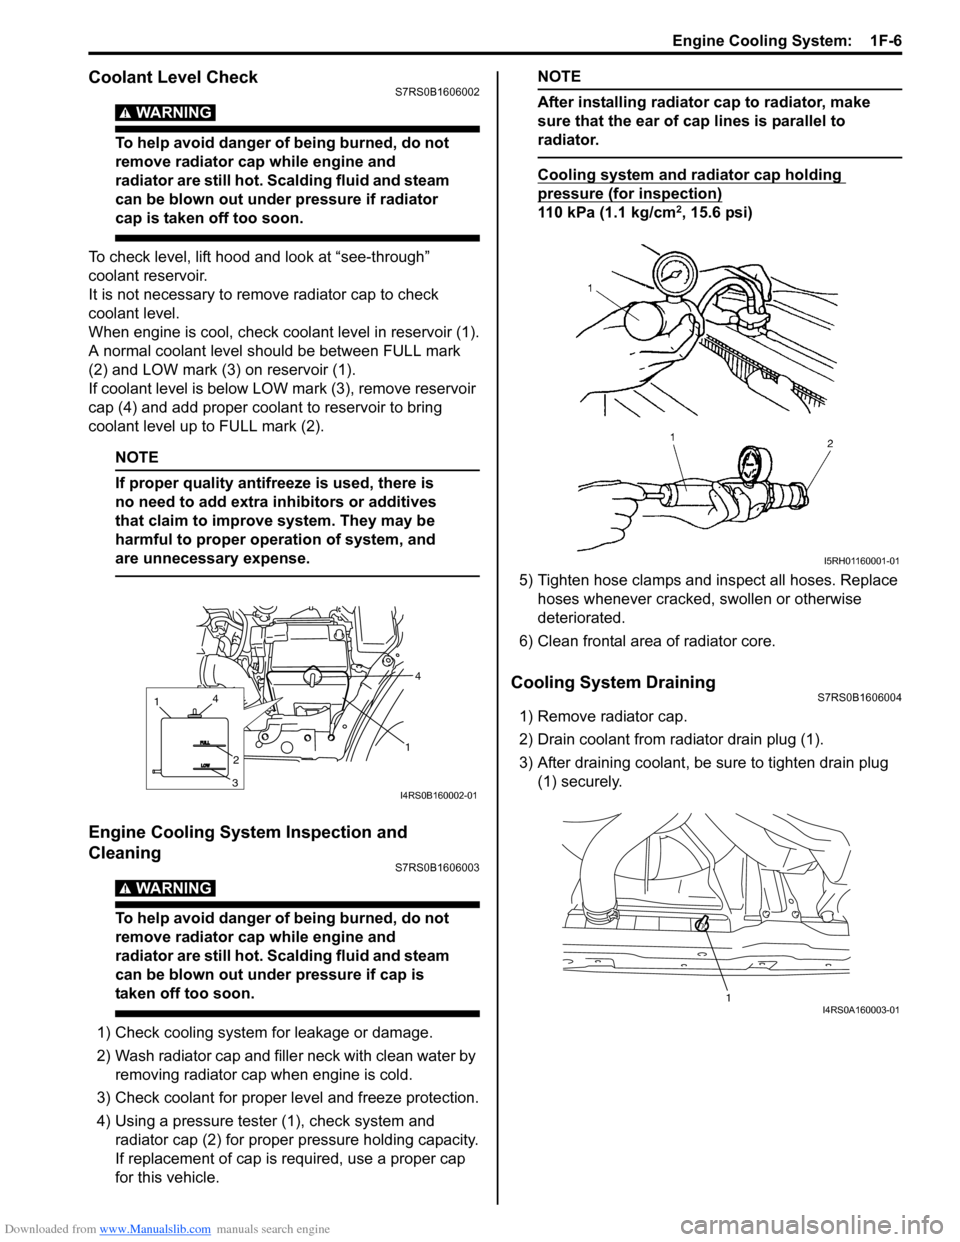 SUZUKI SWIFT 2007 2.G Service Workshop Manual Downloaded from www.Manualslib.com manuals search engine Engine Cooling System:  1F-6
Coolant Level CheckS7RS0B1606002
WARNING! 
To help avoid danger of being burned, do not 
remove radiator cap while